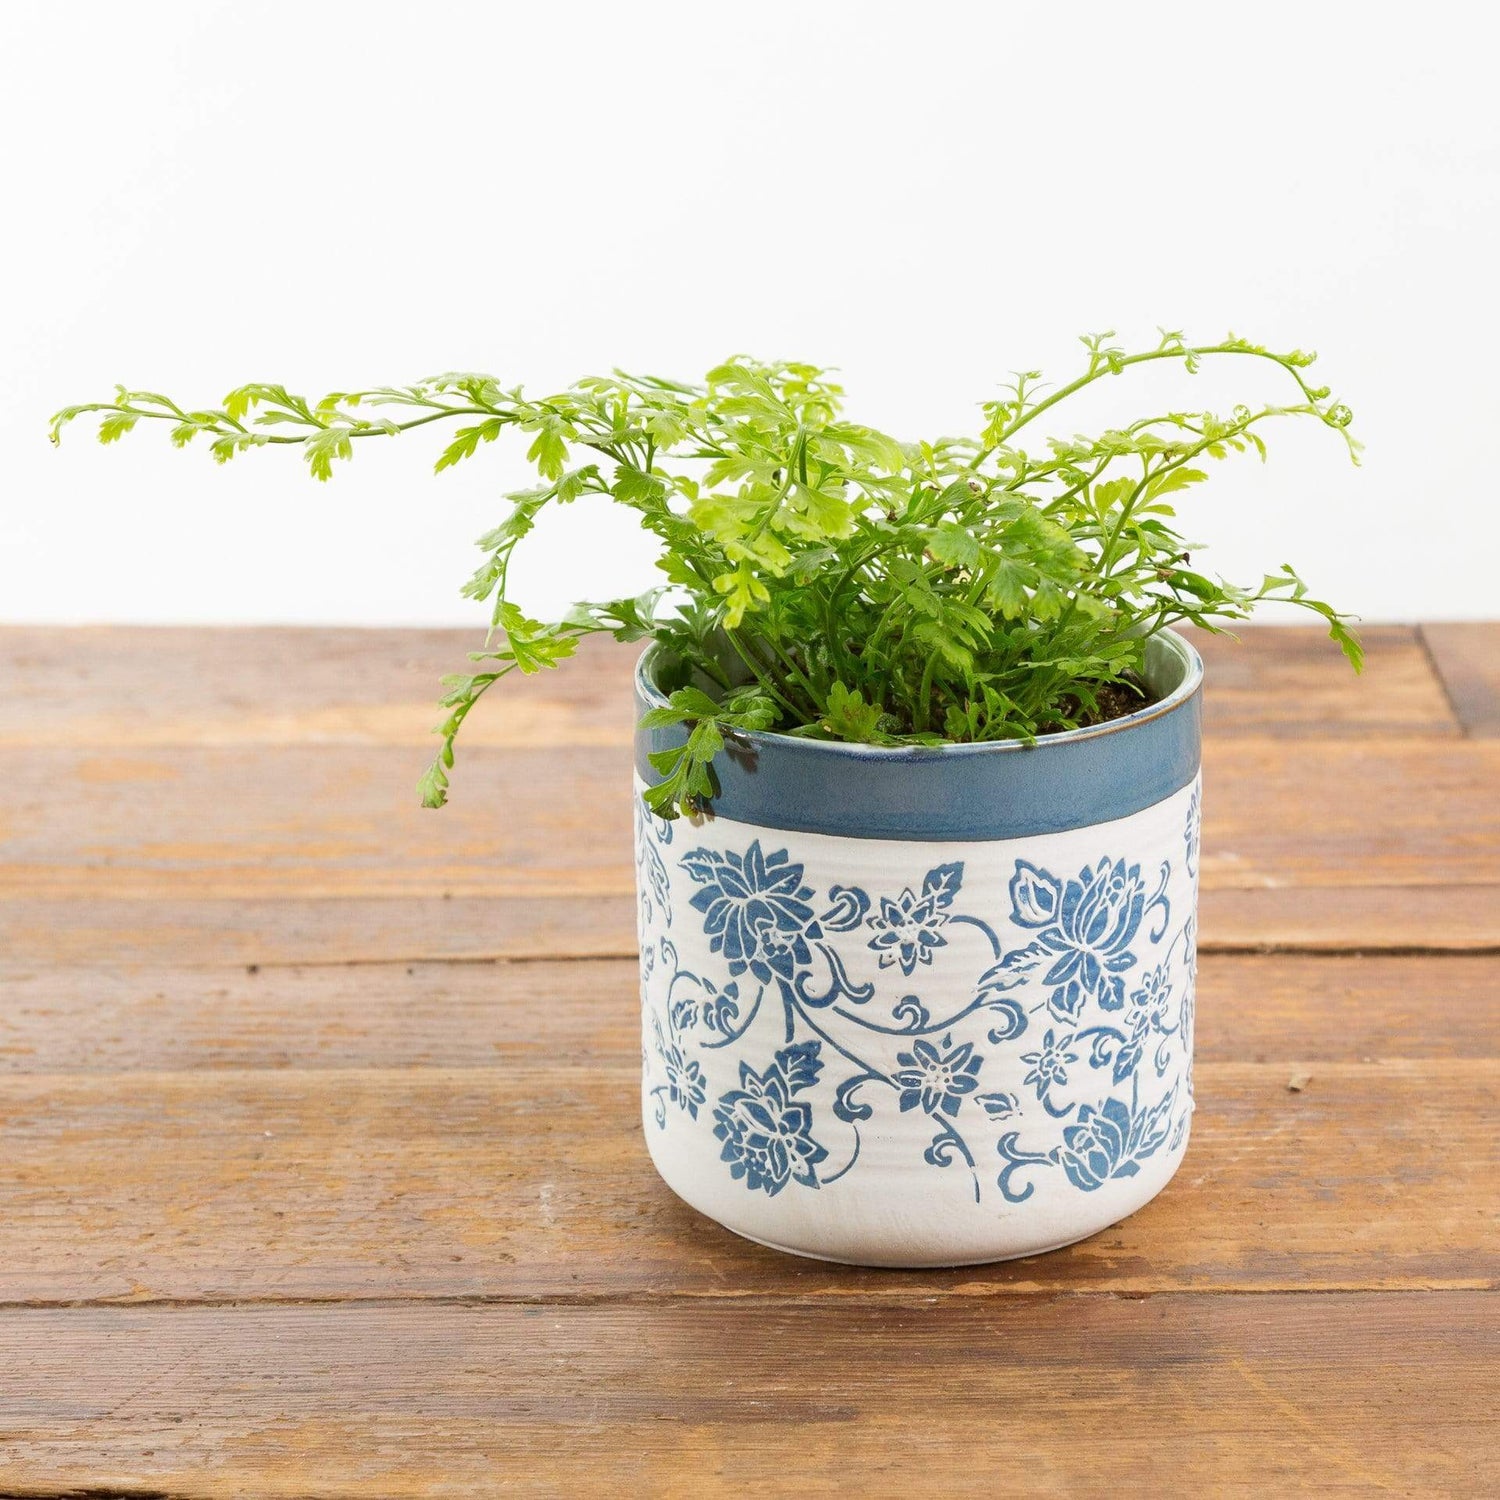 Urban Sprouts Plant 4" in nursery pot Fern 'Mother'